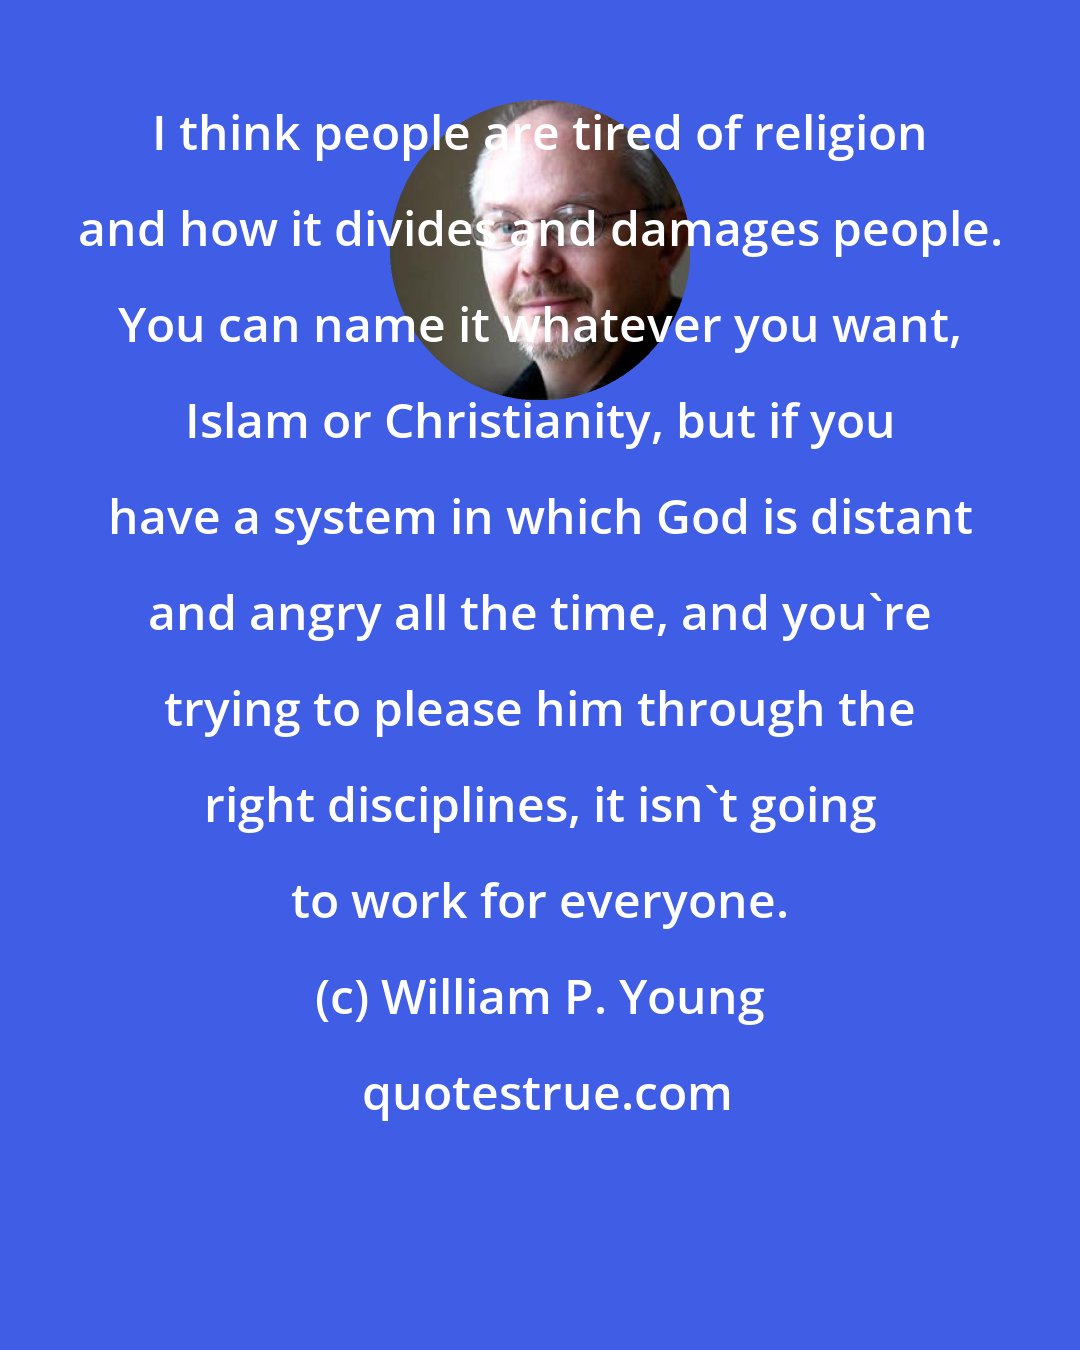 William P. Young: I think people are tired of religion and how it divides and damages people. You can name it whatever you want, Islam or Christianity, but if you have a system in which God is distant and angry all the time, and you're trying to please him through the right disciplines, it isn't going to work for everyone.